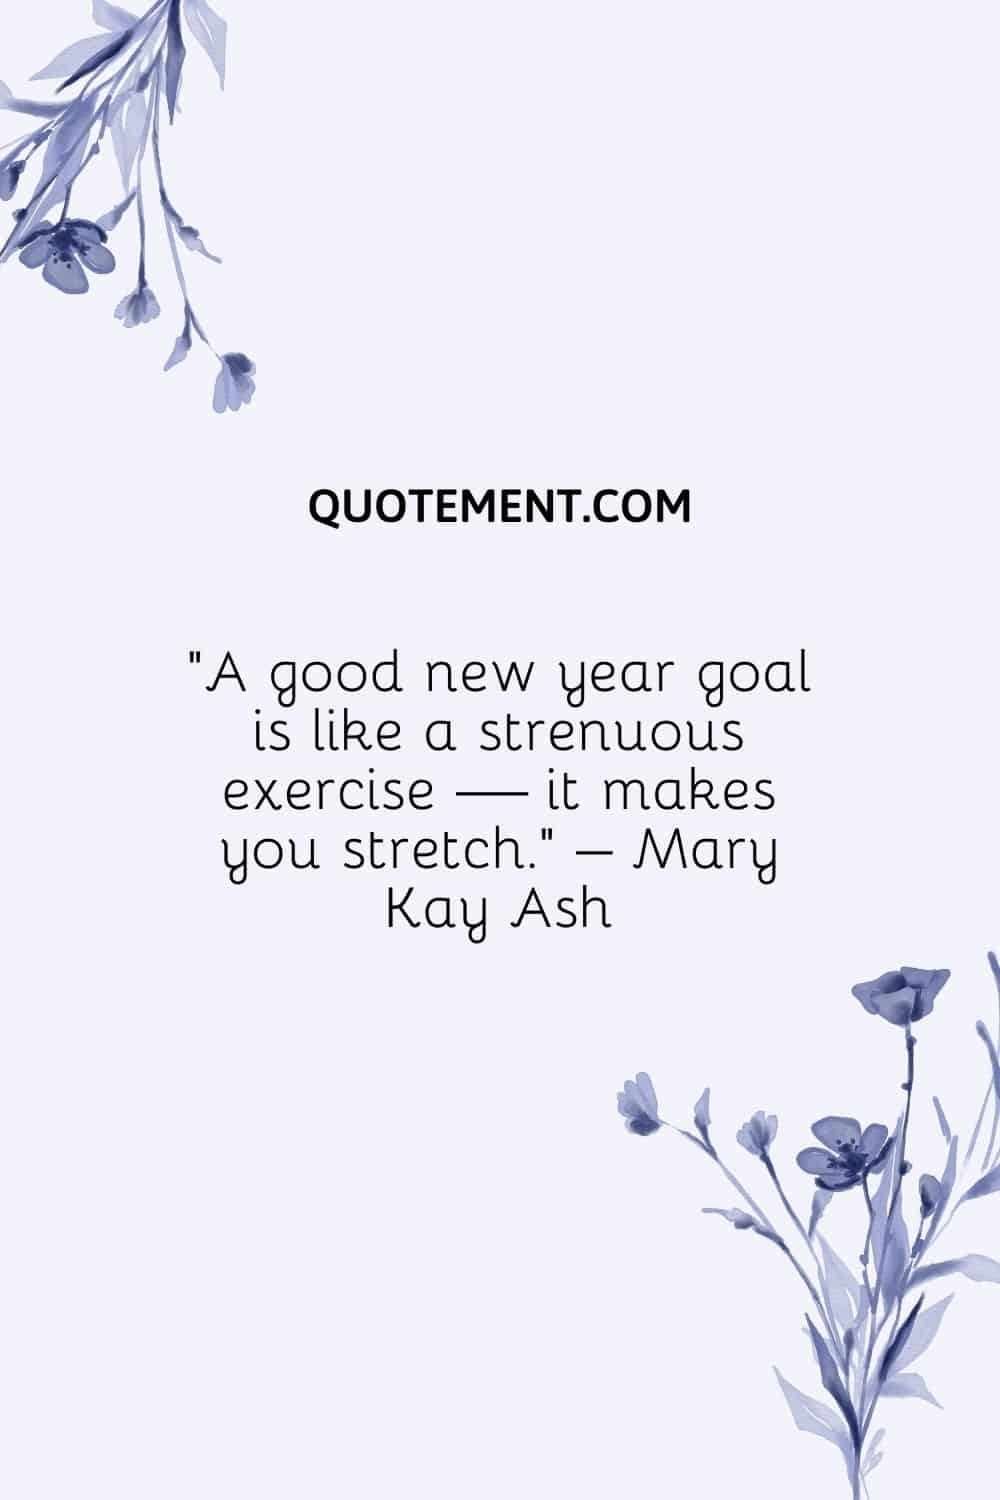 A good new year goal is like a strenuous exercise